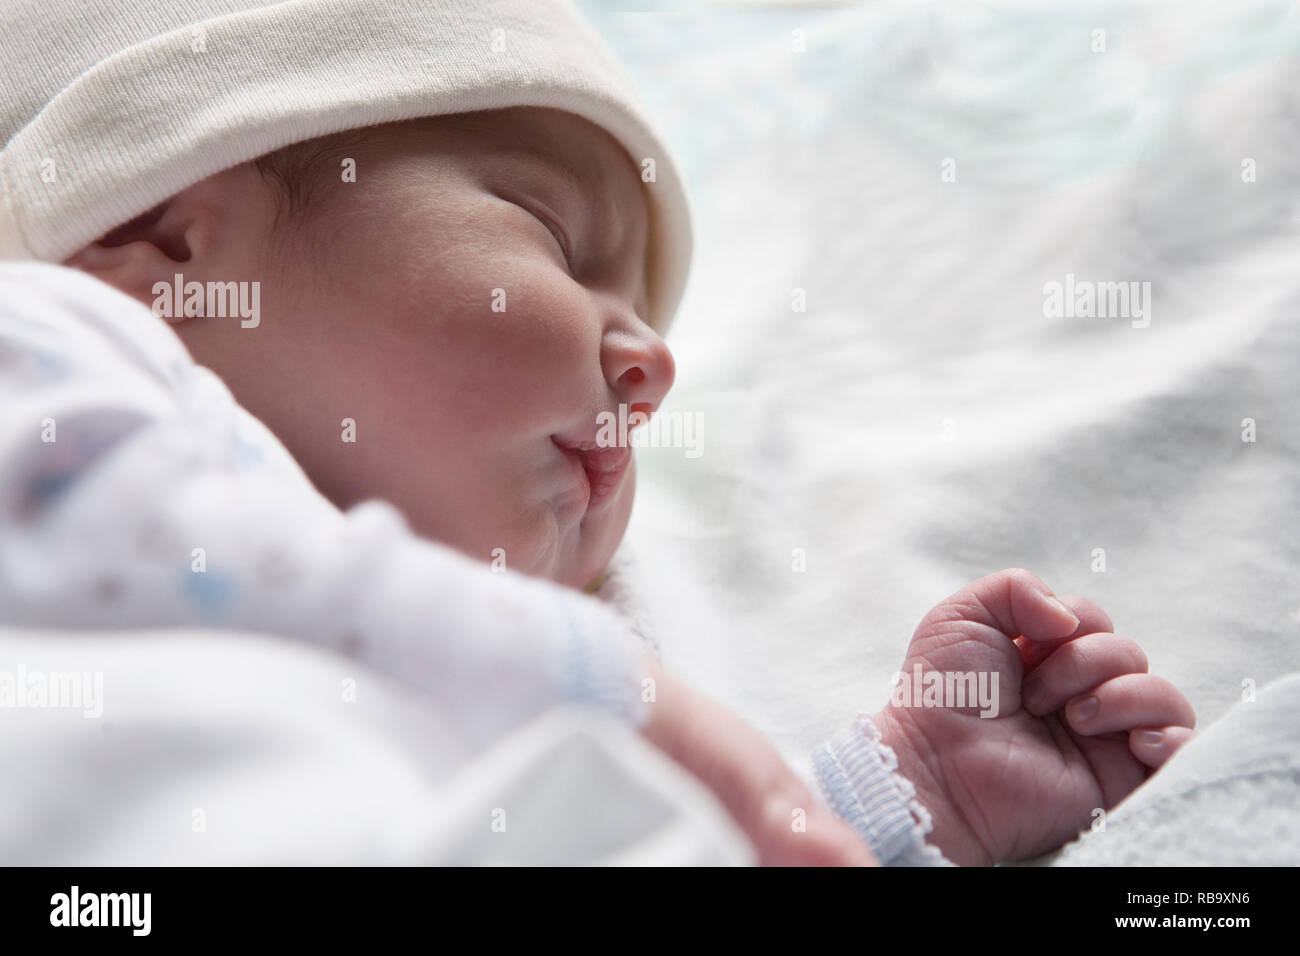 Newborn baby sleeping on side position. Few hours-old baby at hospital crib Stock Photo